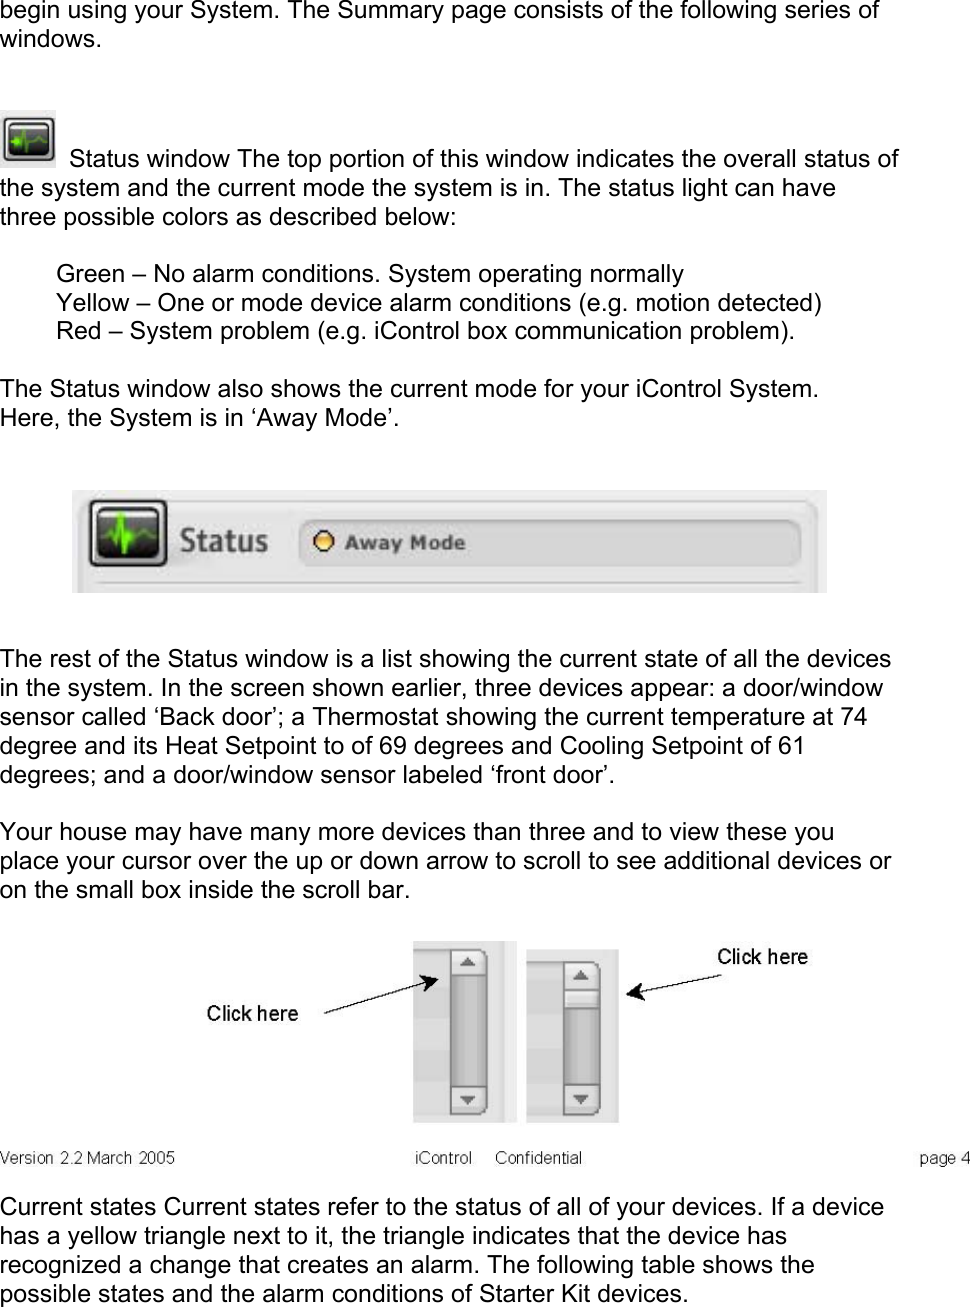 begin using your System. The Summary page consists of the following series of windows.   Status window The top portion of this window indicates the overall status of the system and the current mode the system is in. The status light can have three possible colors as described below:  Green – No alarm conditions. System operating normally Yellow – One or mode device alarm conditions (e.g. motion detected) Red – System problem (e.g. iControl box communication problem).  The Status window also shows the current mode for your iControl System. Here, the System is in ‘Away Mode’.   The rest of the Status window is a list showing the current state of all the devices in the system. In the screen shown earlier, three devices appear: a door/window sensor called ‘Back door’; a Thermostat showing the current temperature at 74 degree and its Heat Setpoint to of 69 degrees and Cooling Setpoint of 61 degrees; and a door/window sensor labeled ‘front door’.  Your house may have many more devices than three and to view these you place your cursor over the up or down arrow to scroll to see additional devices or on the small box inside the scroll bar.   Current states Current states refer to the status of all of your devices. If a device has a yellow triangle next to it, the triangle indicates that the device has recognized a change that creates an alarm. The following table shows the possible states and the alarm conditions of Starter Kit devices.  